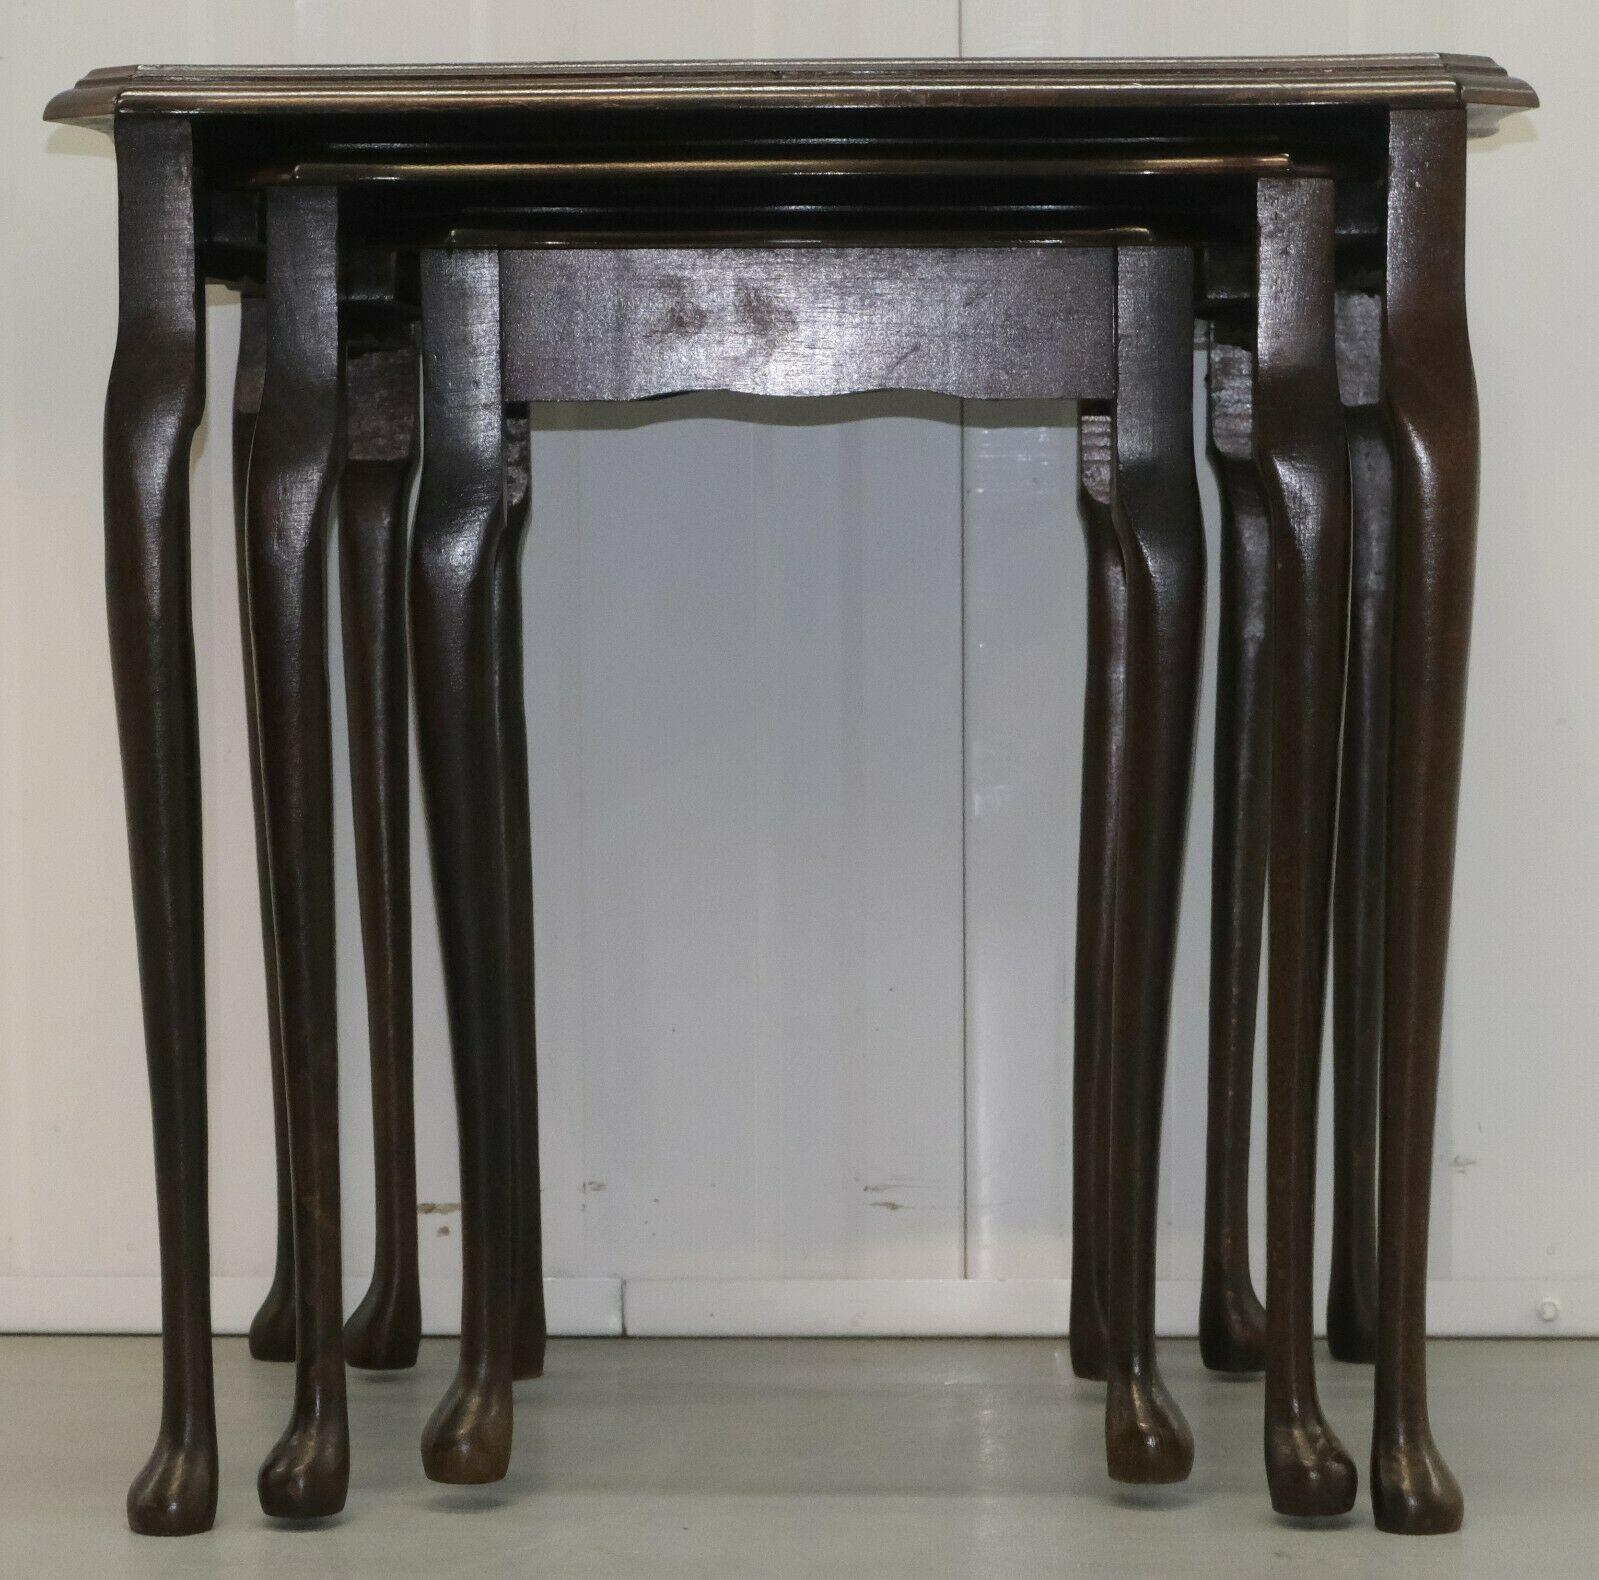 We are delighted to offer for sale this gorgeous mahogany nest of tables raised on cabriole legs.

This trio is very useful as they can be used as coffee or side tables, as they take up very little space when not in use. They are in good